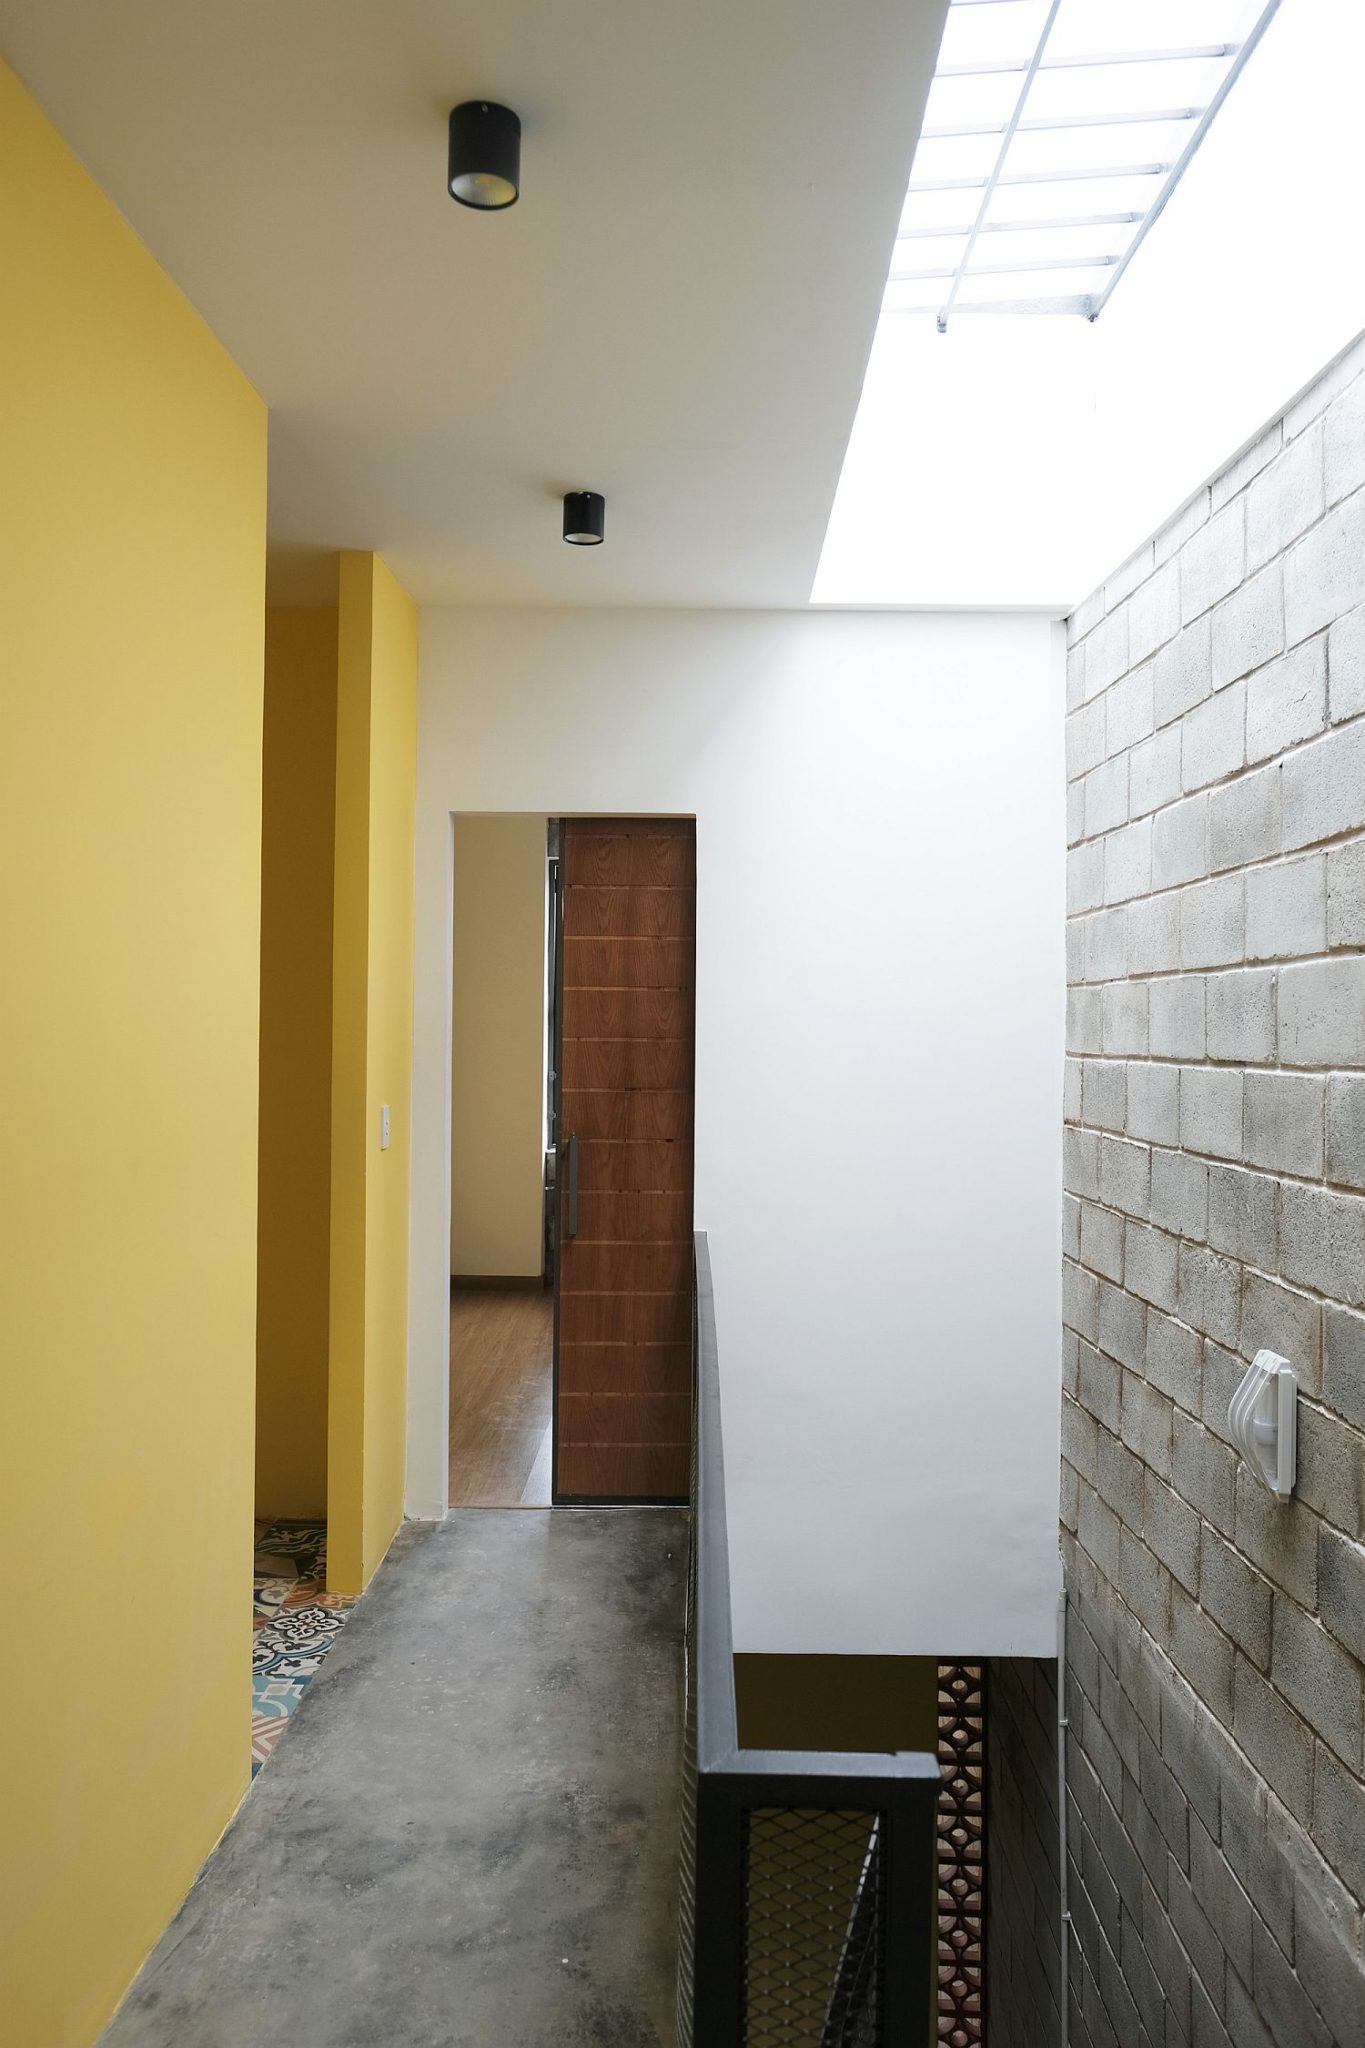 Simple duct brings natural light into the cost-effective home